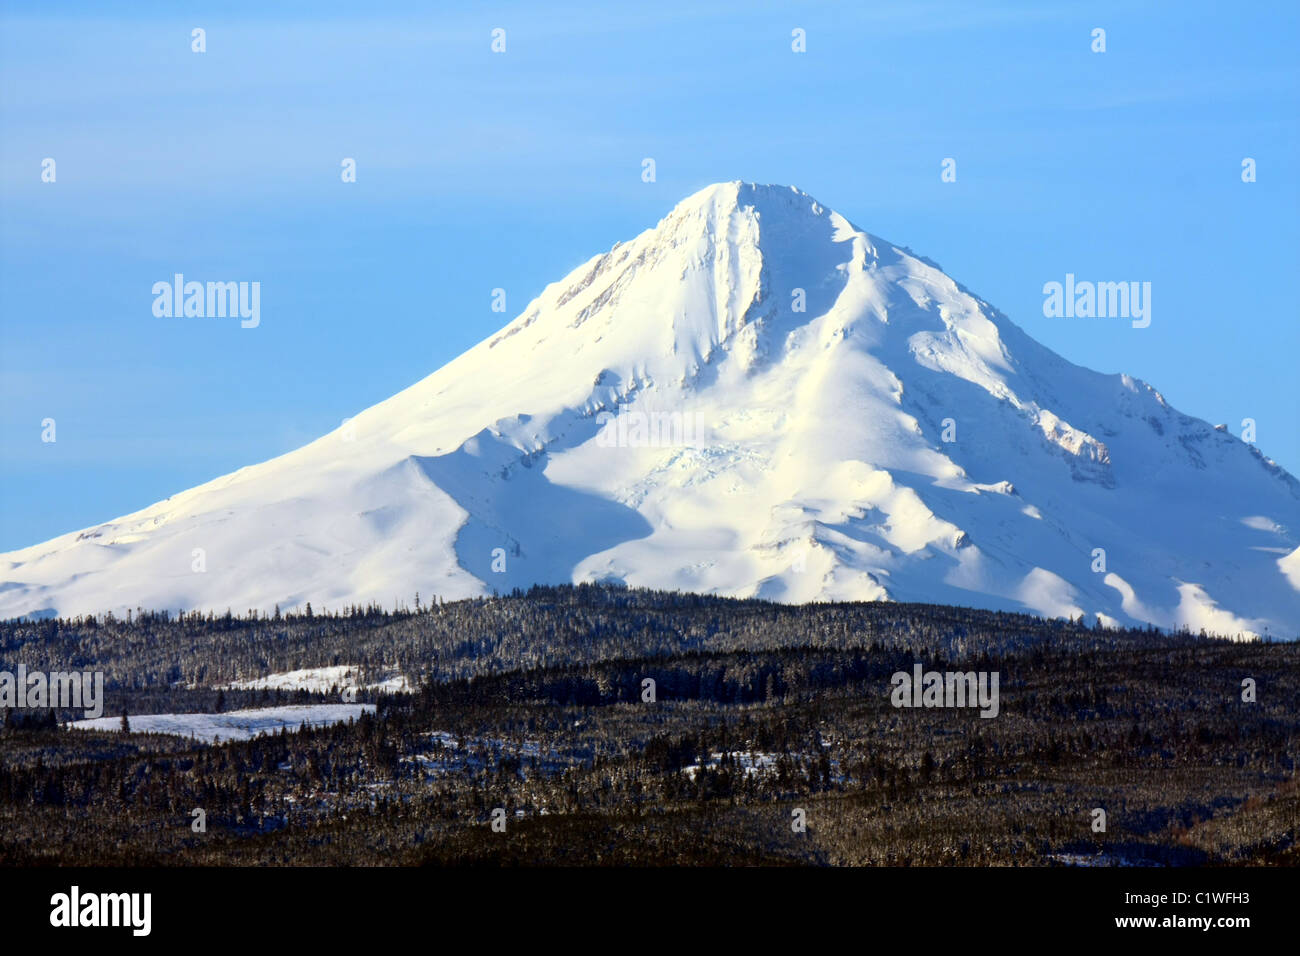 40,600.03123 A distant snow-covered mountain -- Mt Hood (11,240 ft tall) -- soaring over a tree covered ridge top, against a soft blue sky. Stock Photo